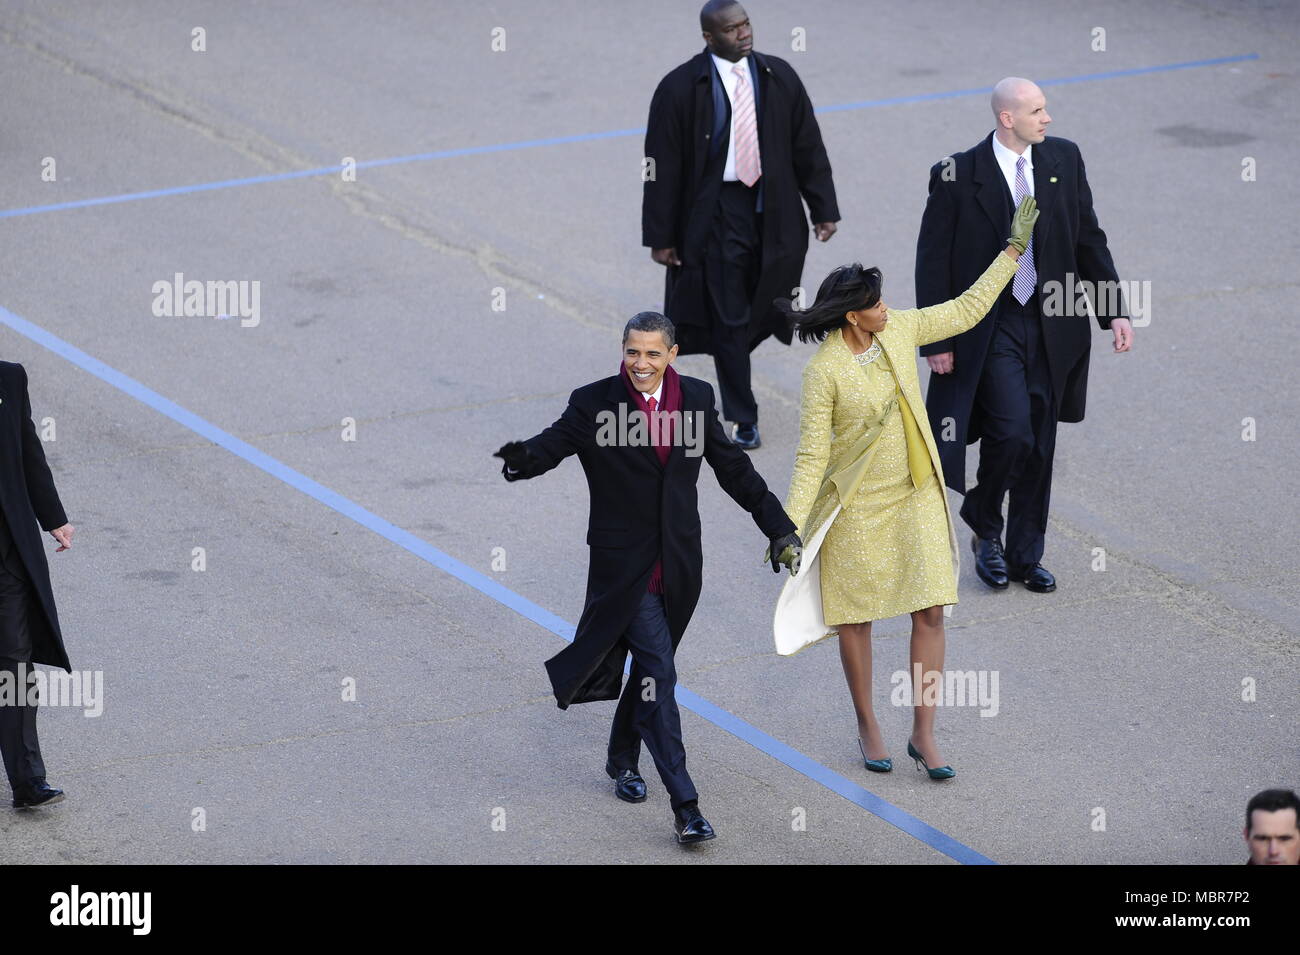 President Barack Obama and first lady Michelle Obama wave to the crowd as they make their way down Pennsylvania Avenue during the 2009 presidential inaugural parade in Washington, D.C., Jan. 20, 2009.DoD photo by Master Sgt. Gerold Gamble, U.S. Air Force Stock Photo